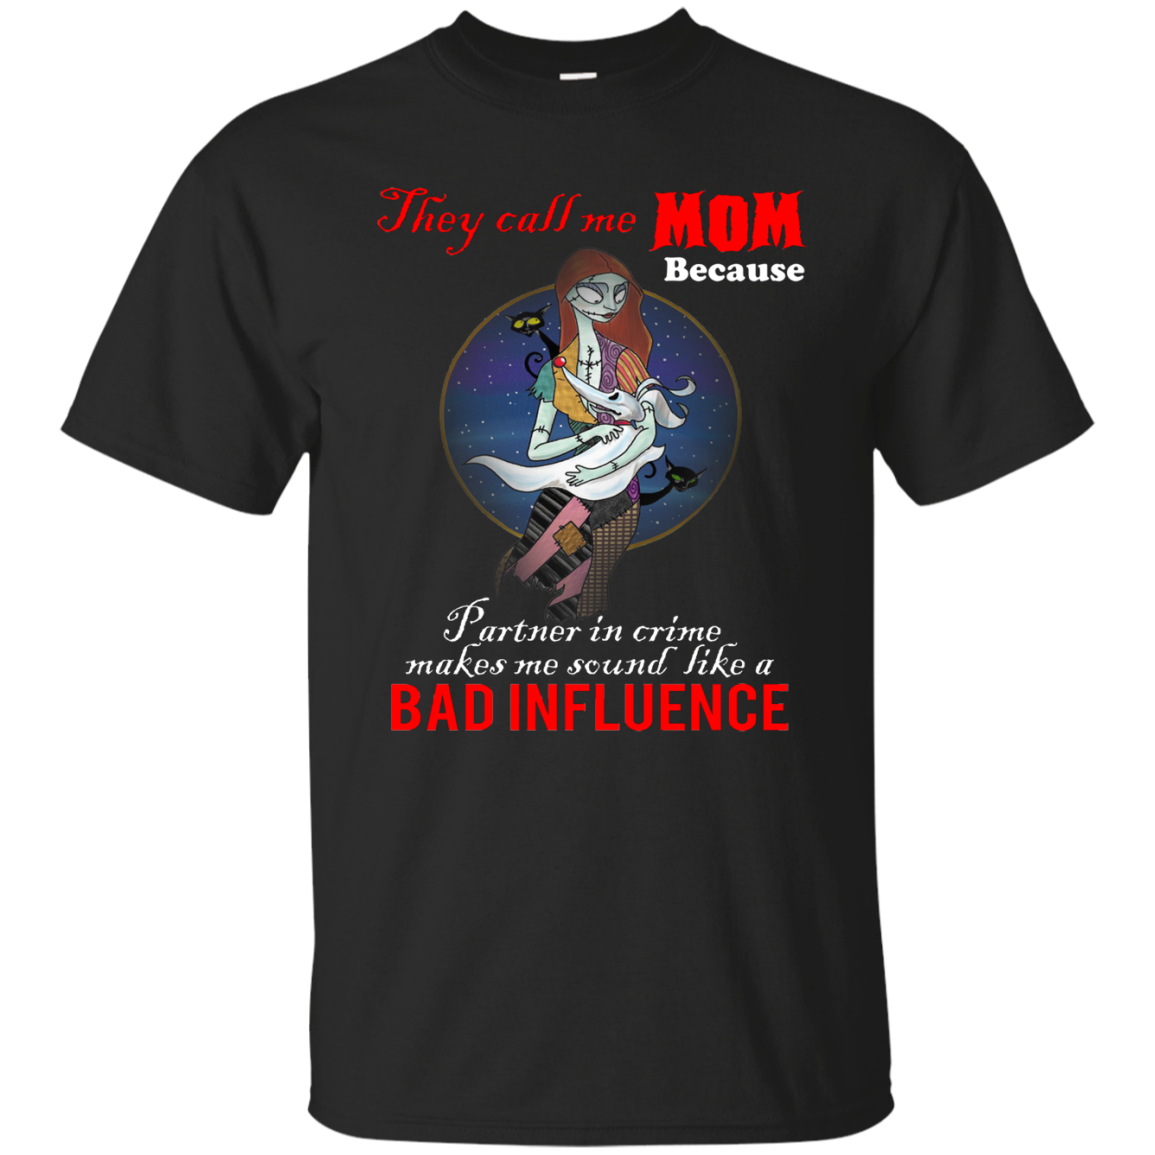 Sally: They call me Mom because partner in crime shirt